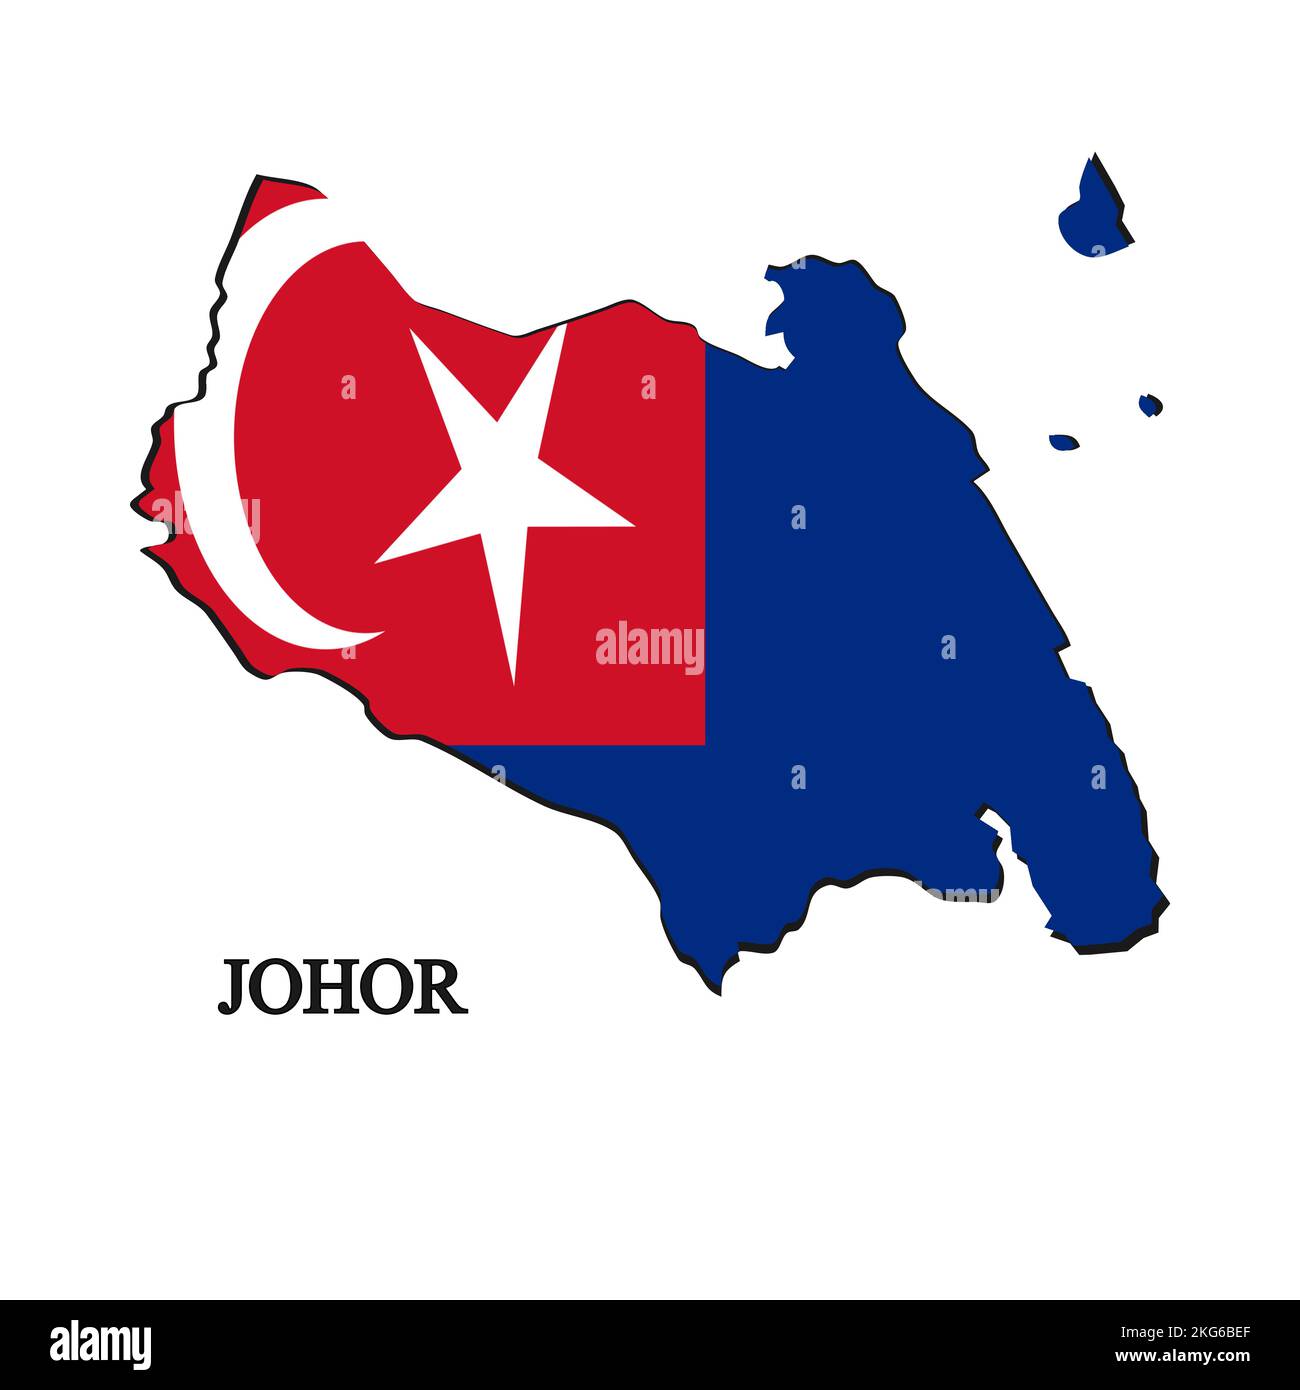 Johor map vector illustration. Malaysian city. State in Malaysia Stock Vector